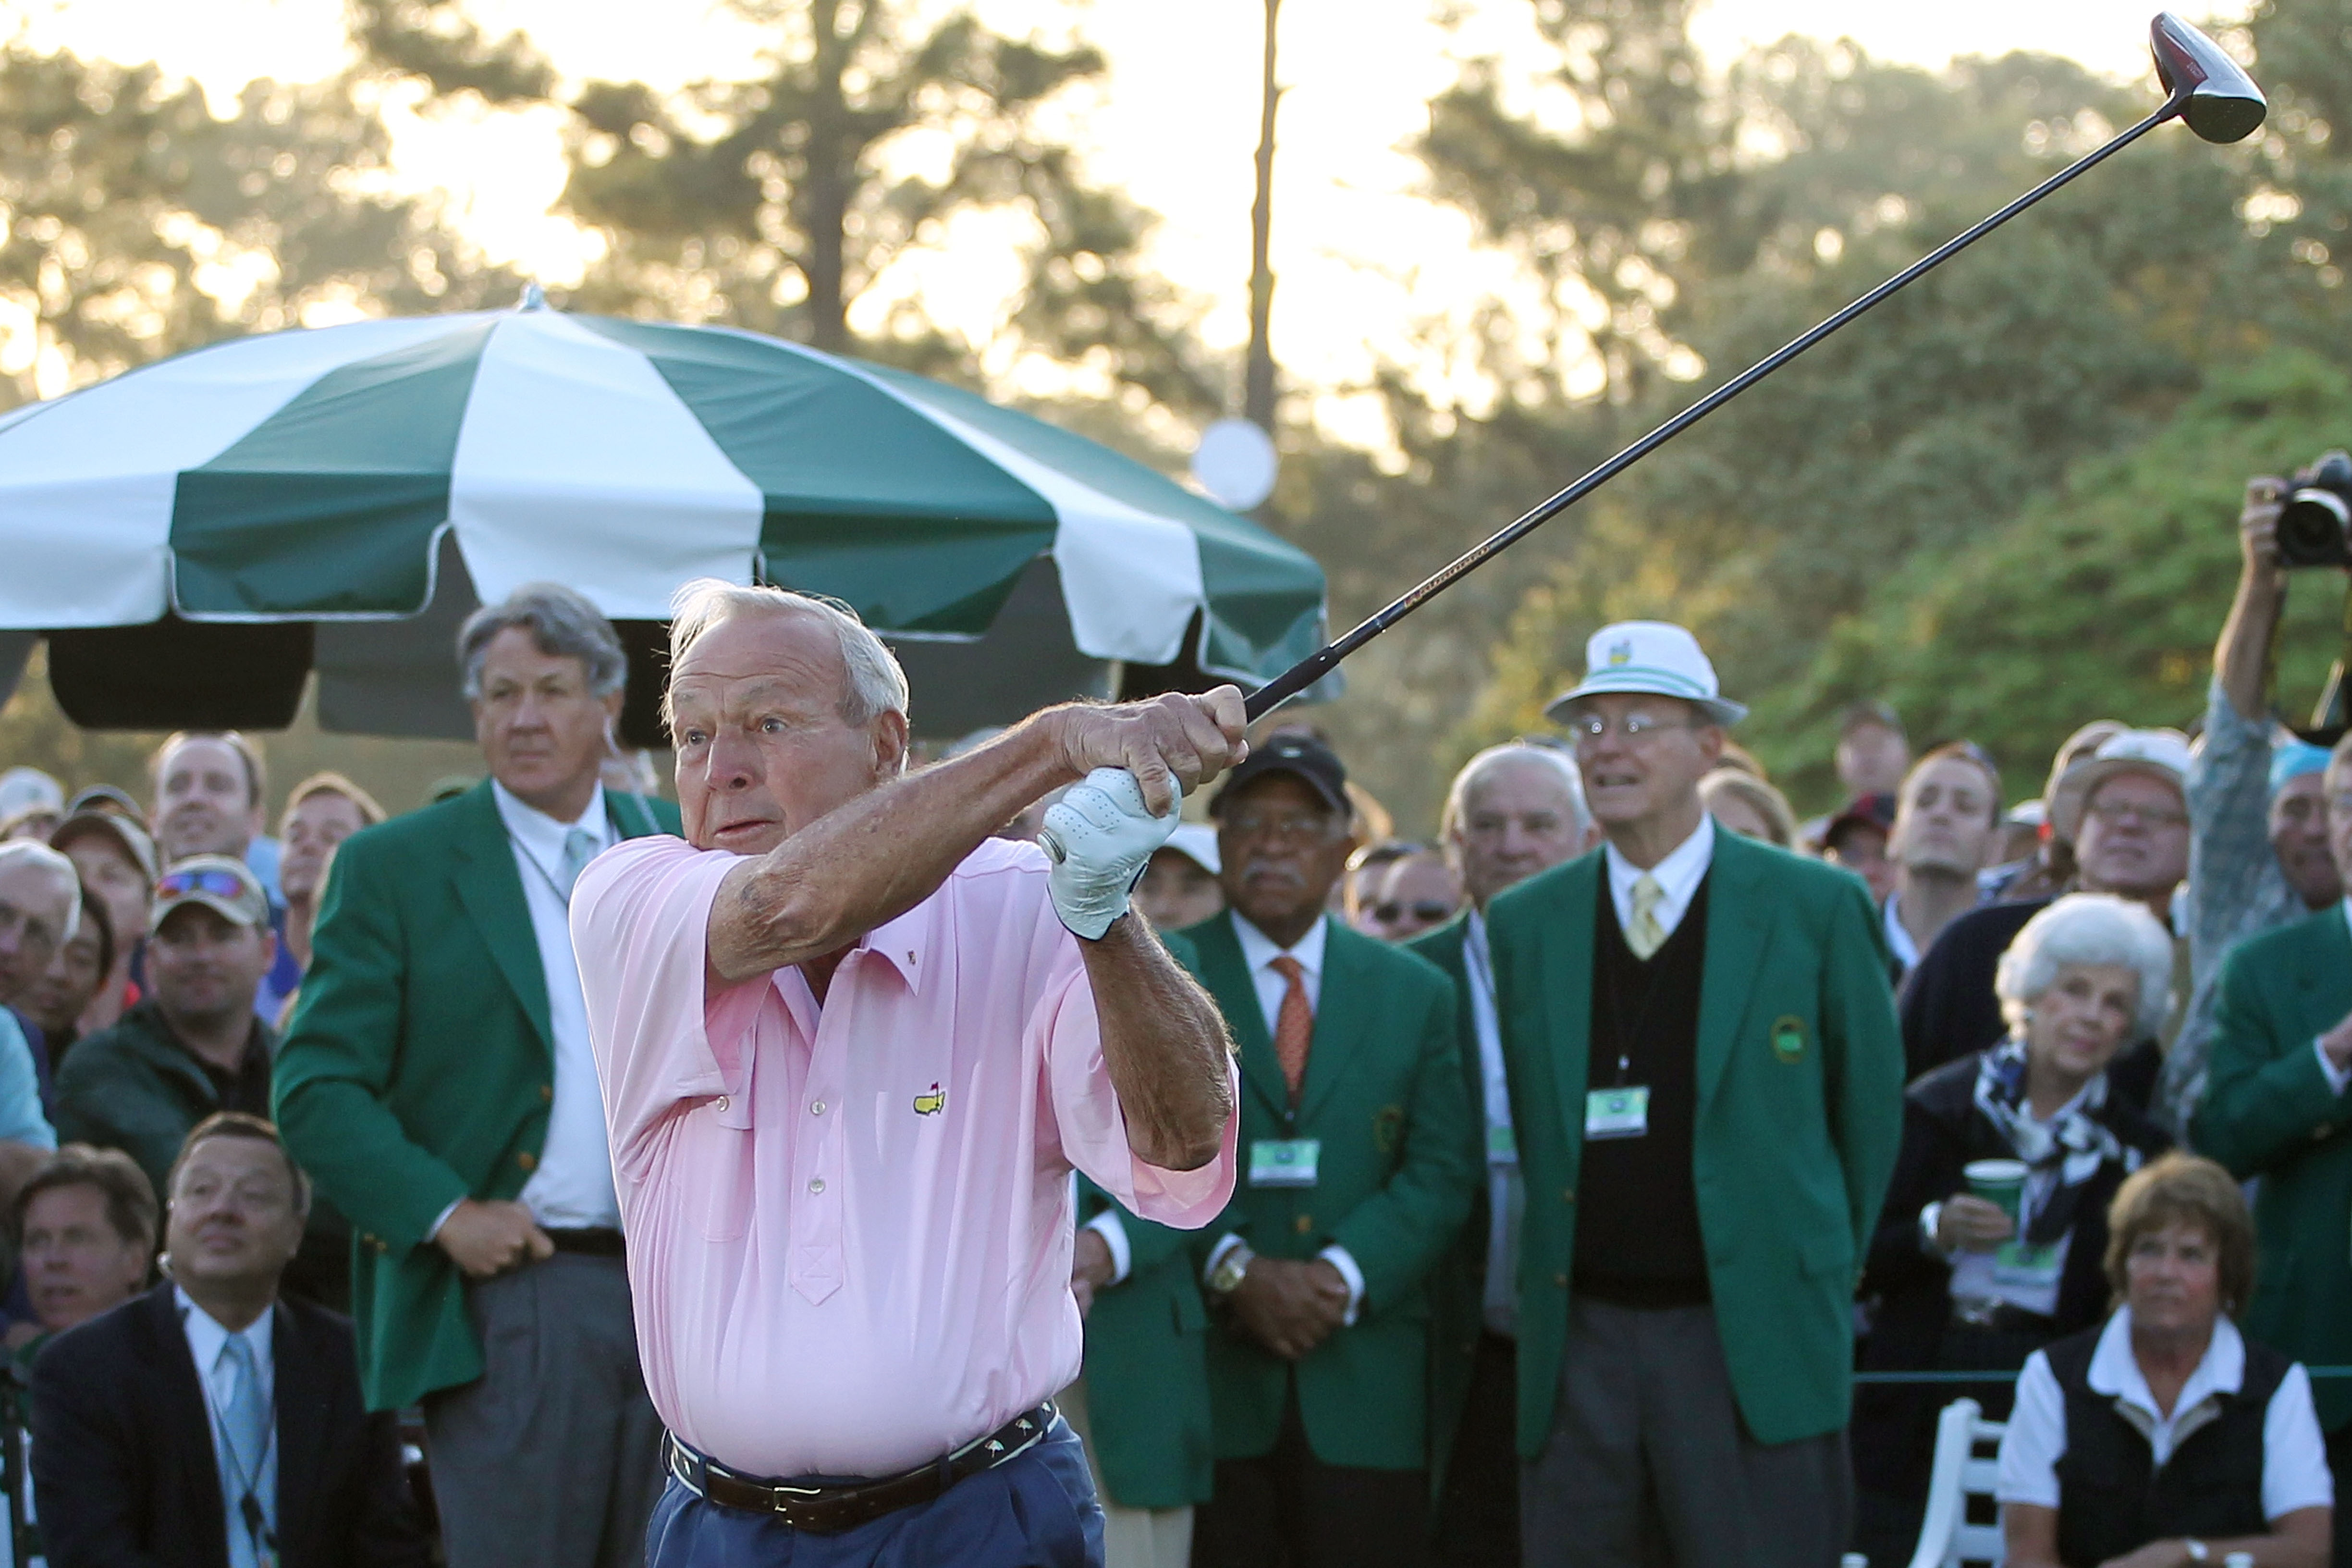 AUGUSTA, GA - APRIL 08:  Honorary starter Arnold Palmer hits his tee shot on the first hole during the first round of the 2010 Masters Tournament at Augusta National Golf Club on April 8, 2010 in Augusta, Georgia.  (Photo by Jamie Squire/Getty Images)